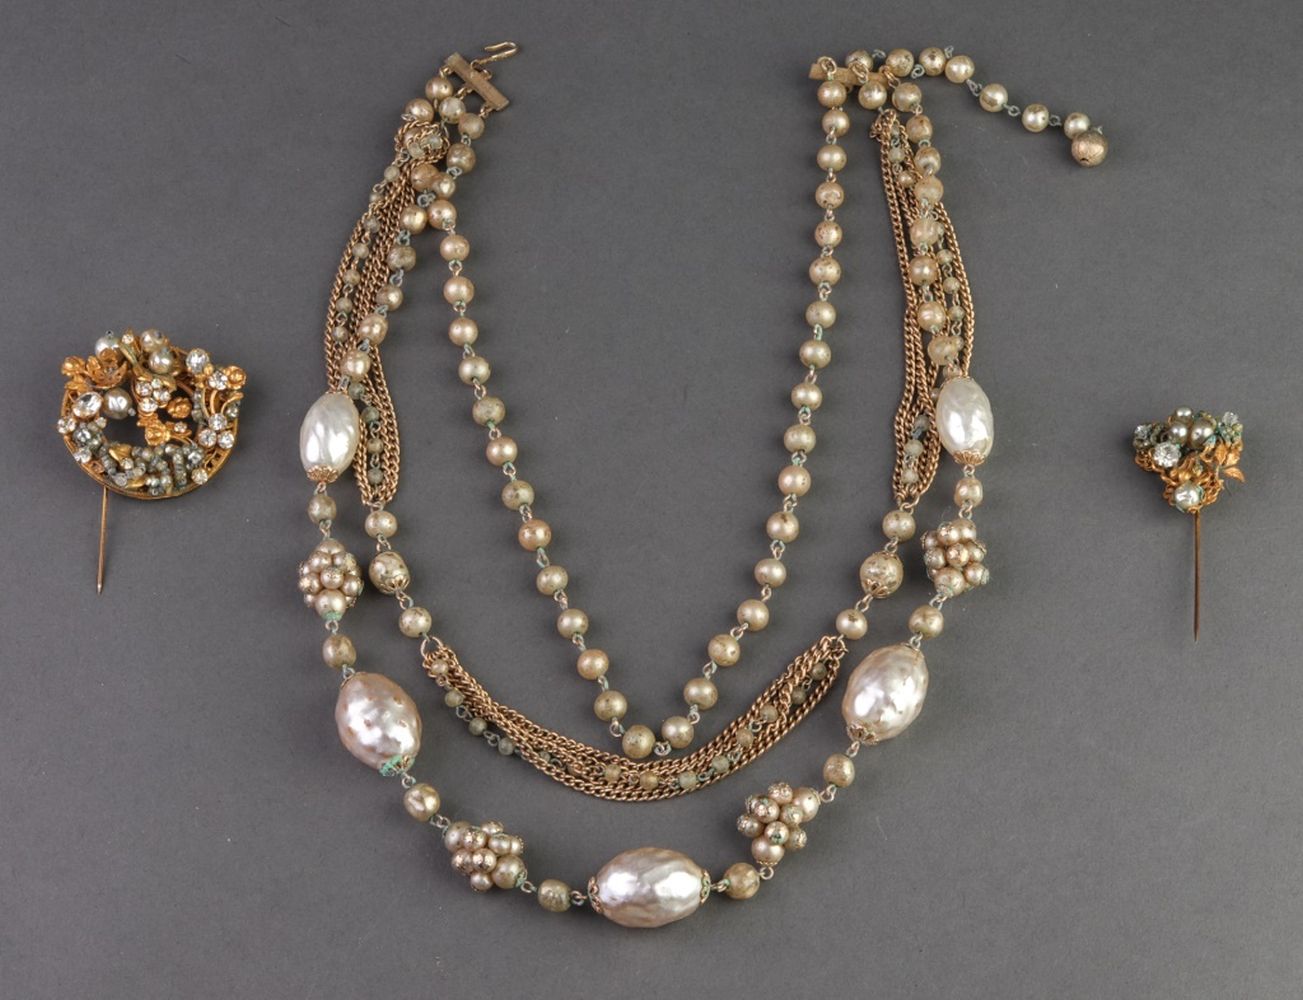 MIRIAM HASKELL ATTR. FAUX PEARL JEWELRY,